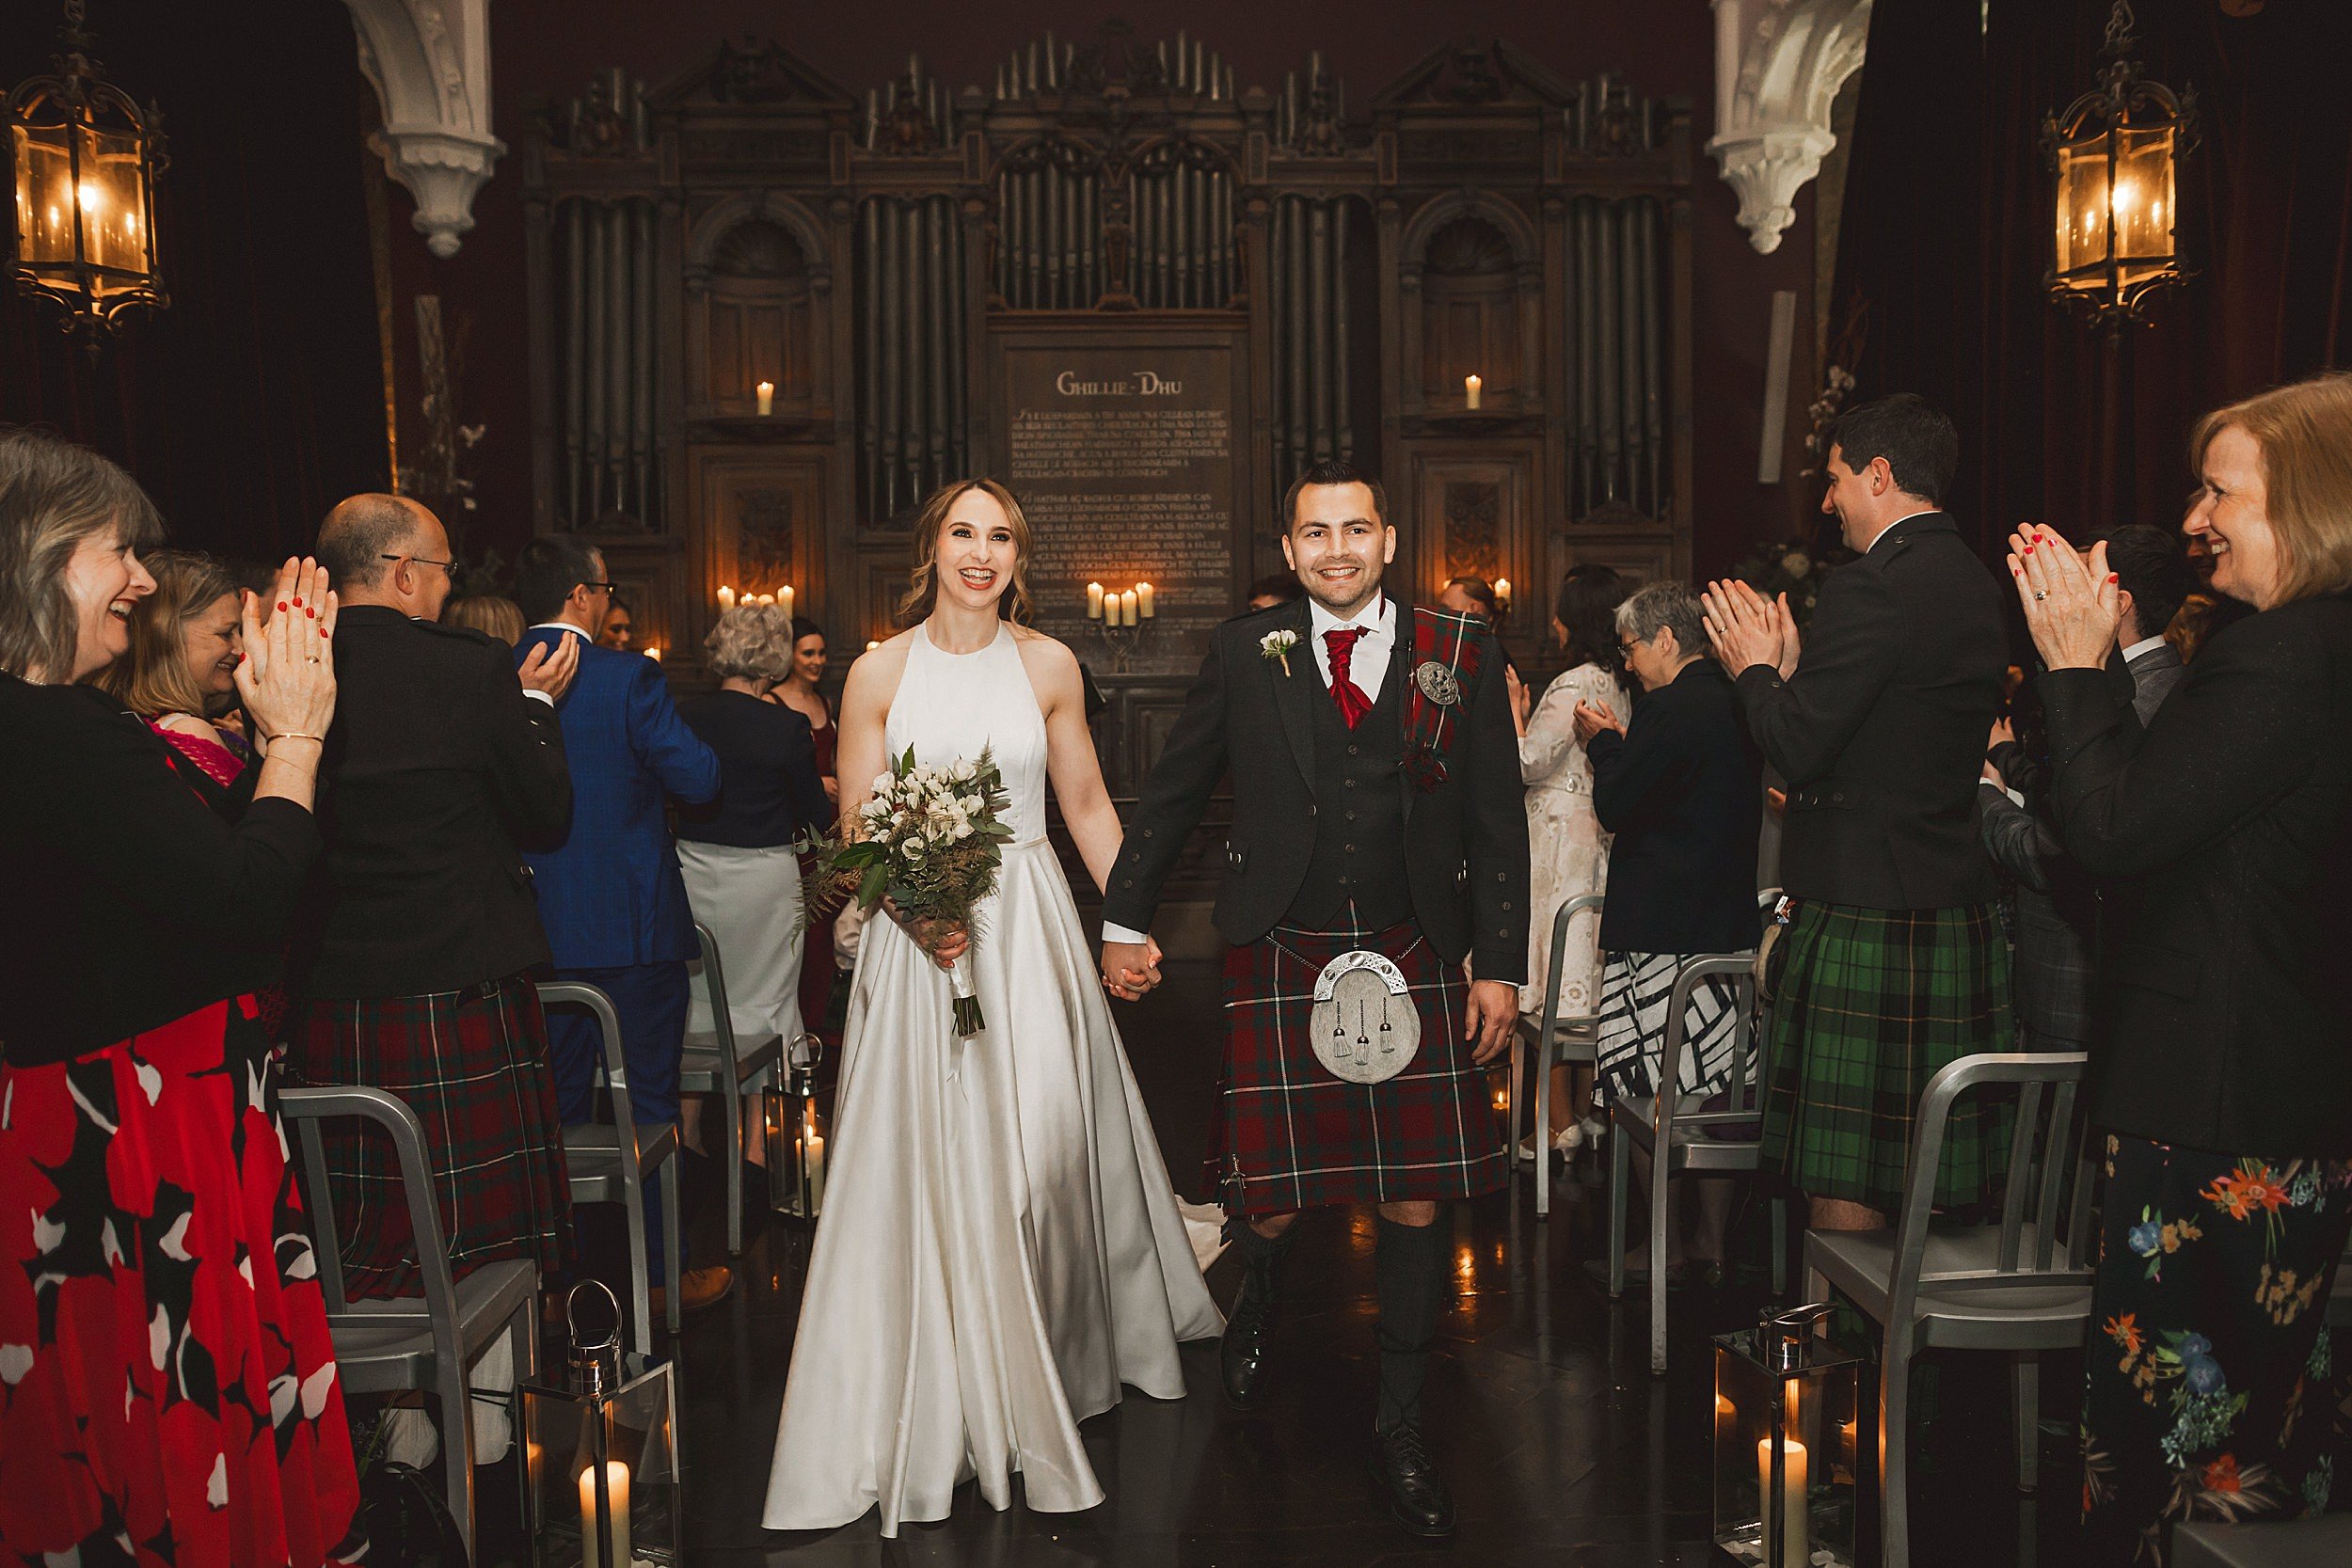 guests stand and applaud as the bride and groom walk down the aisle together holding hands at the ghillie dhu edinburgh wedding venue in scotland shot by documentary wedding photographer edinburgh